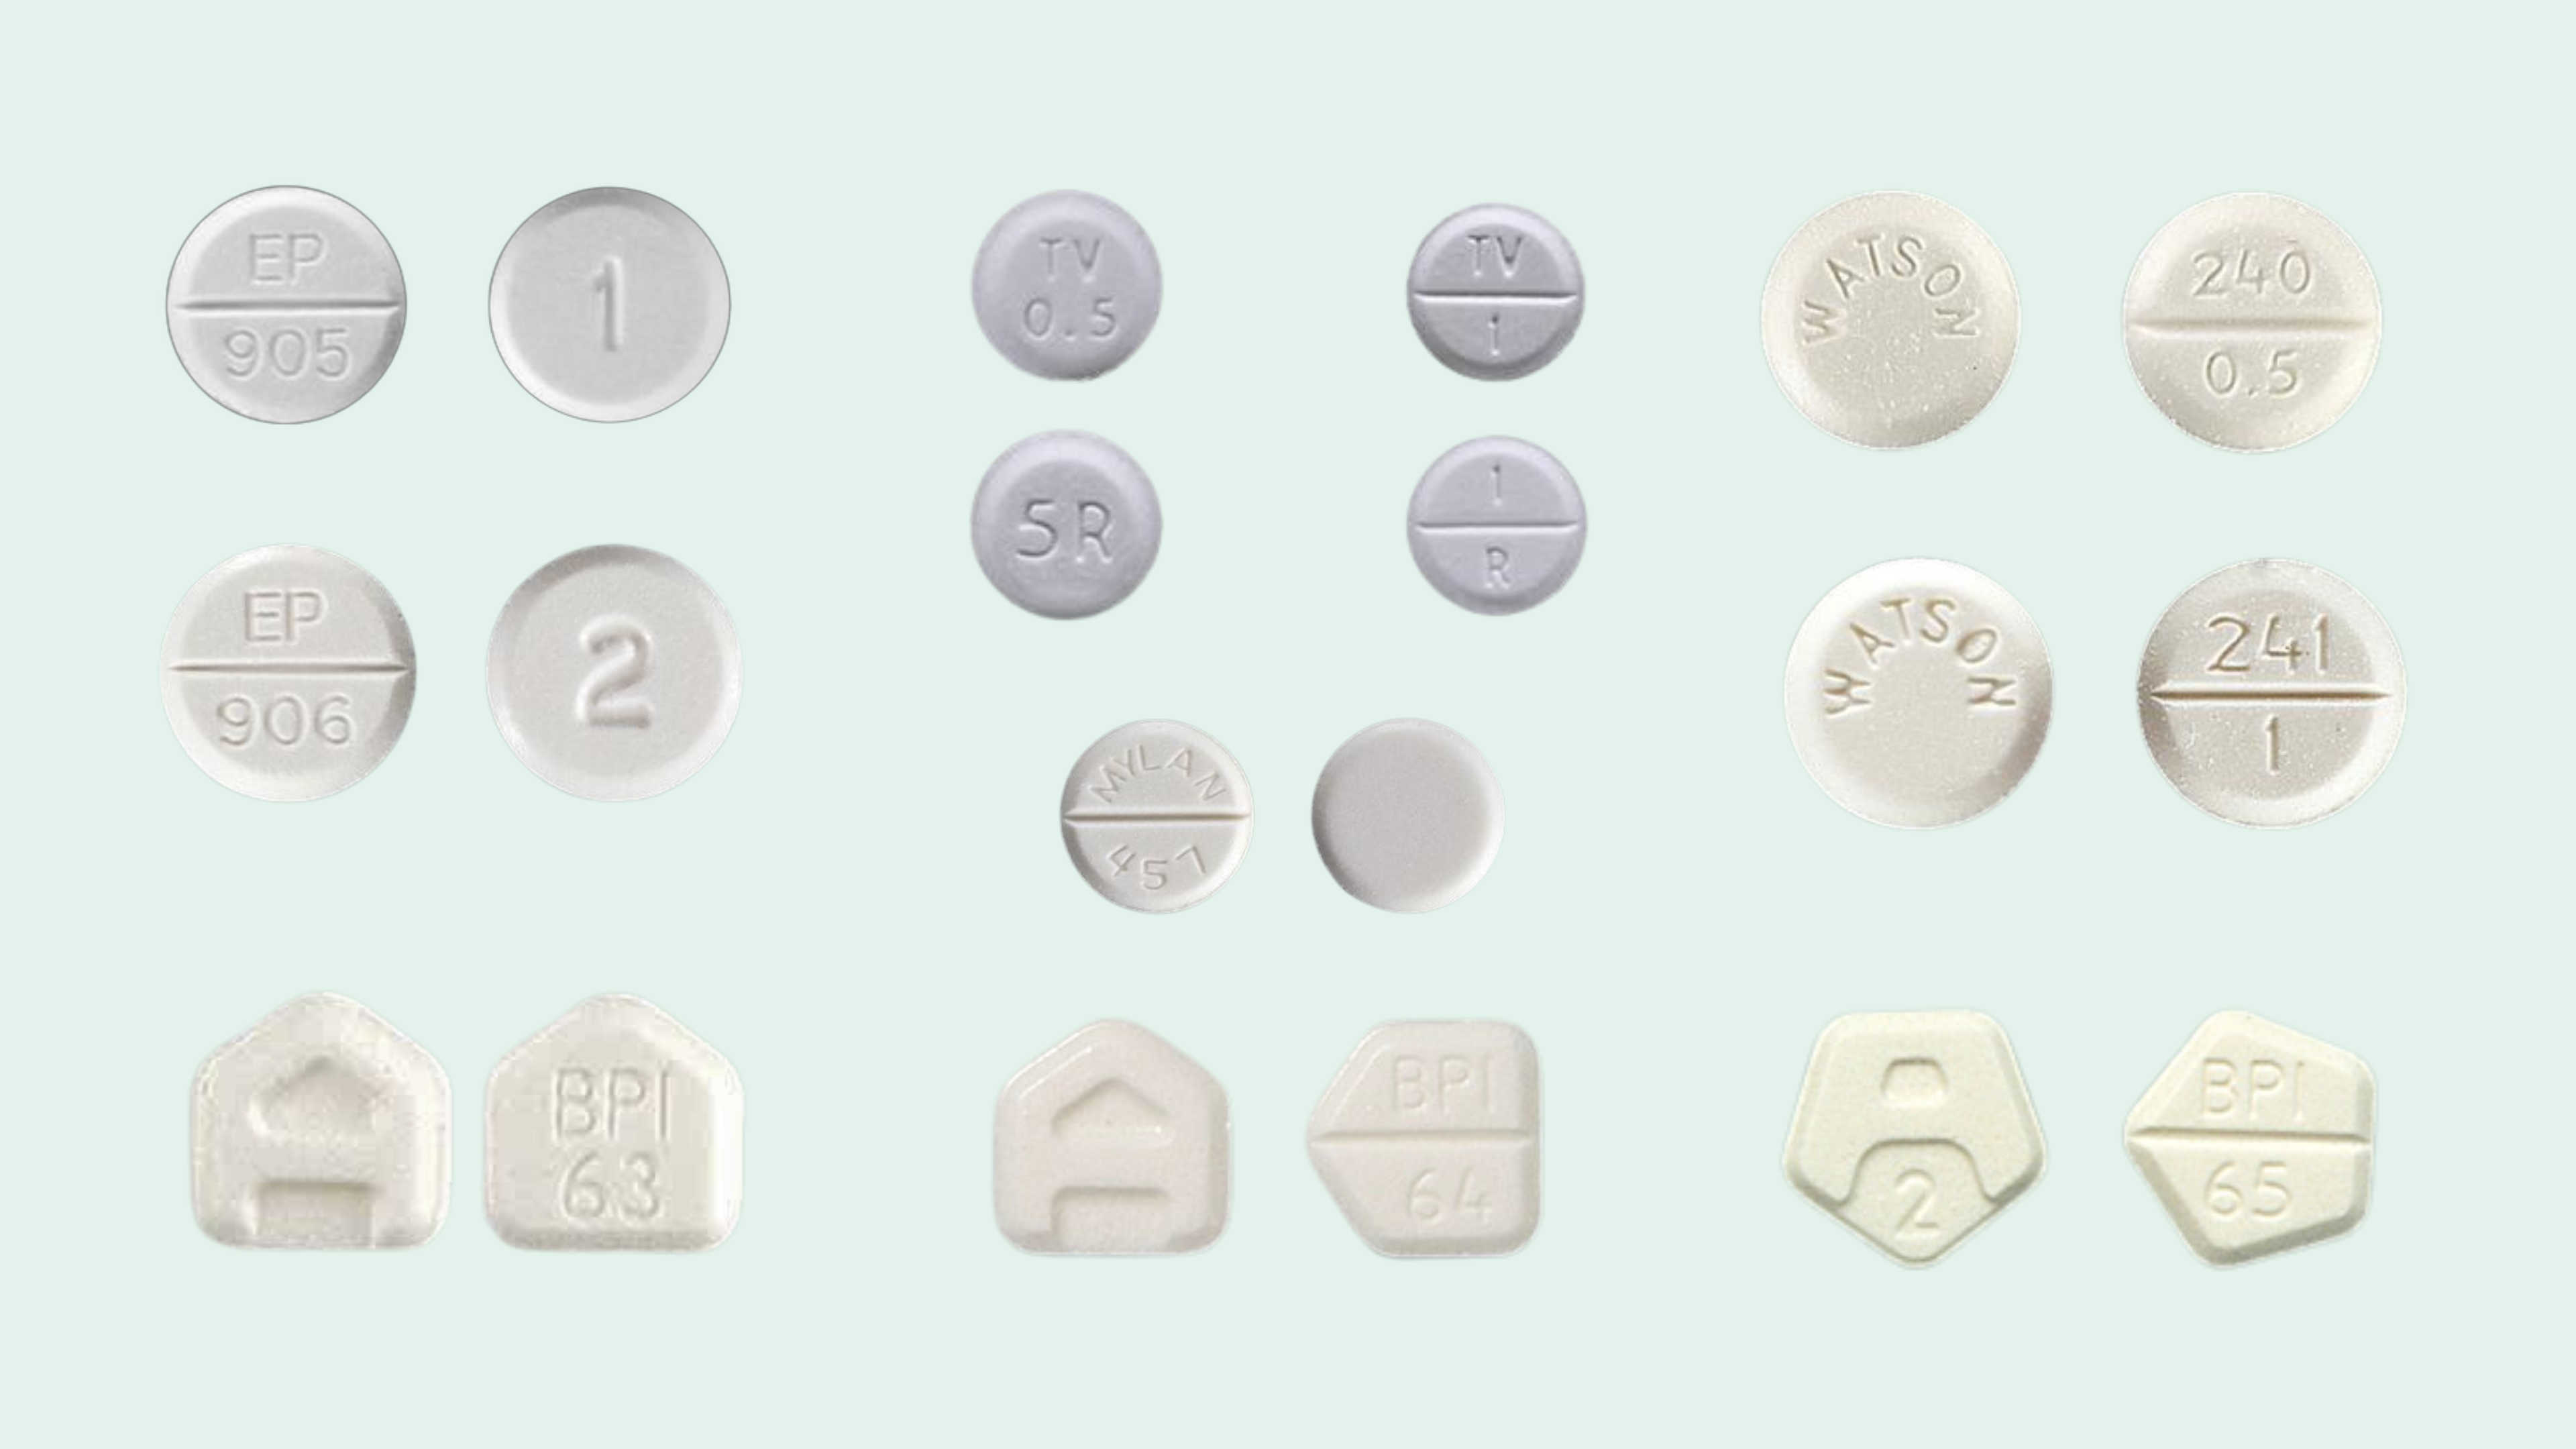 Images of various Ativan and Lorazepam pills